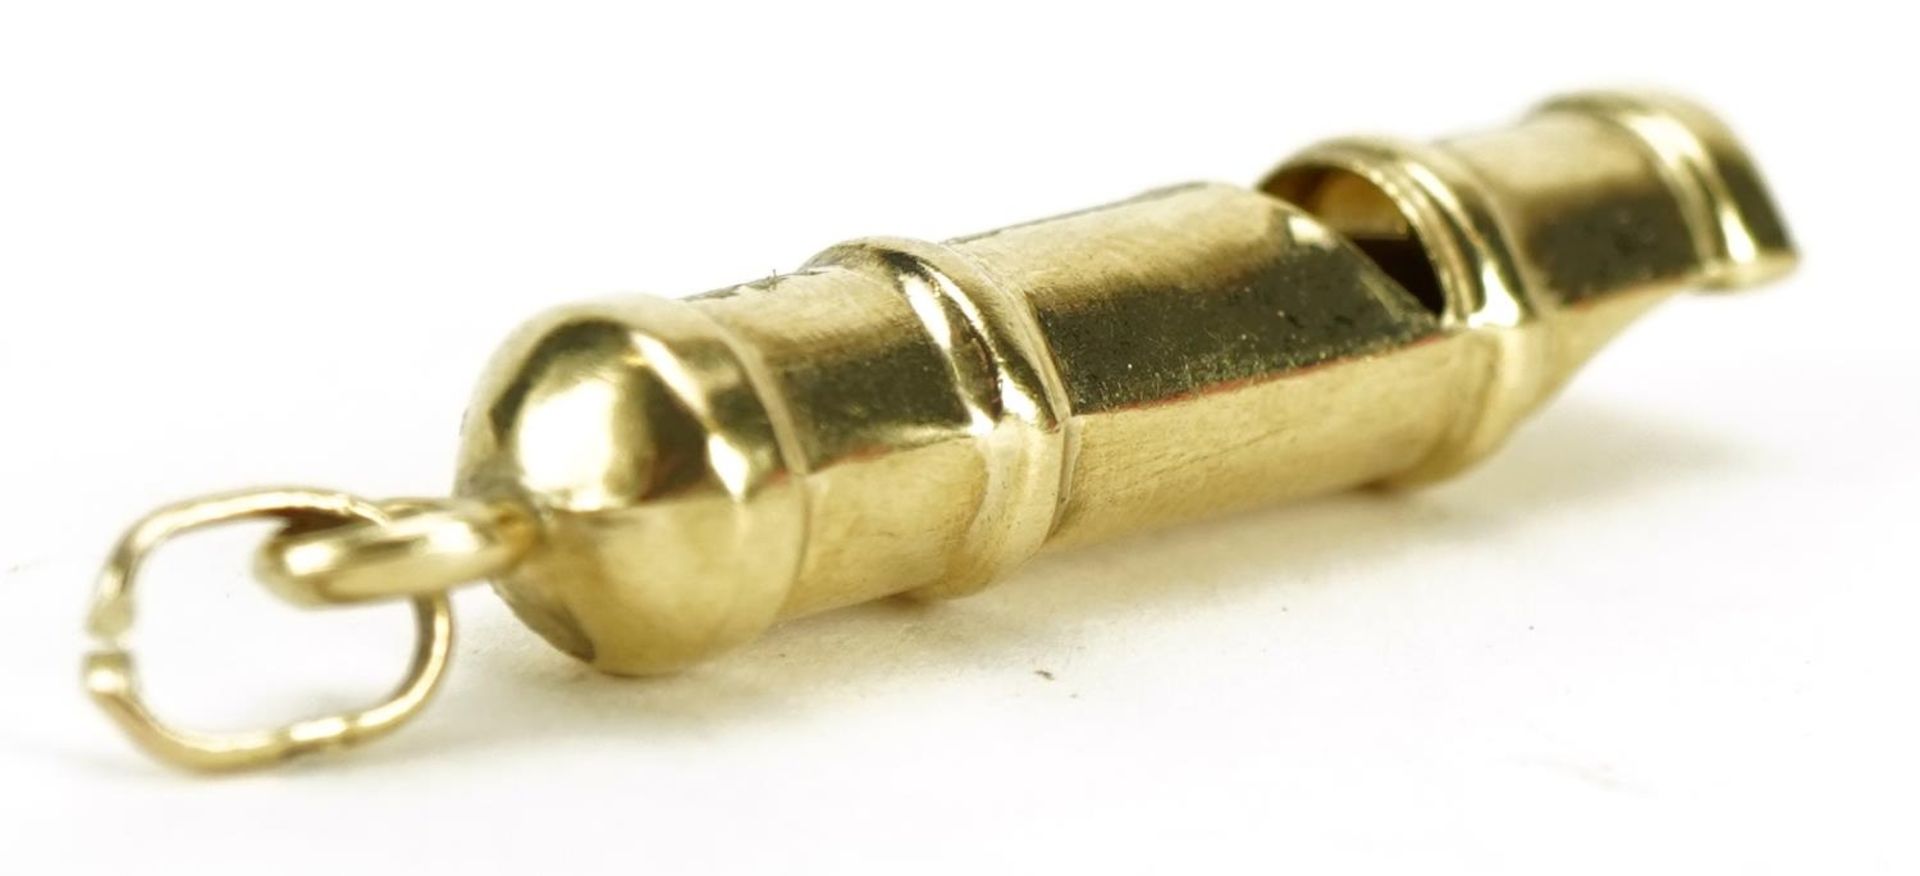 9ct gold whistle charm, 3.6cm in length, 2.3g - Image 2 of 2